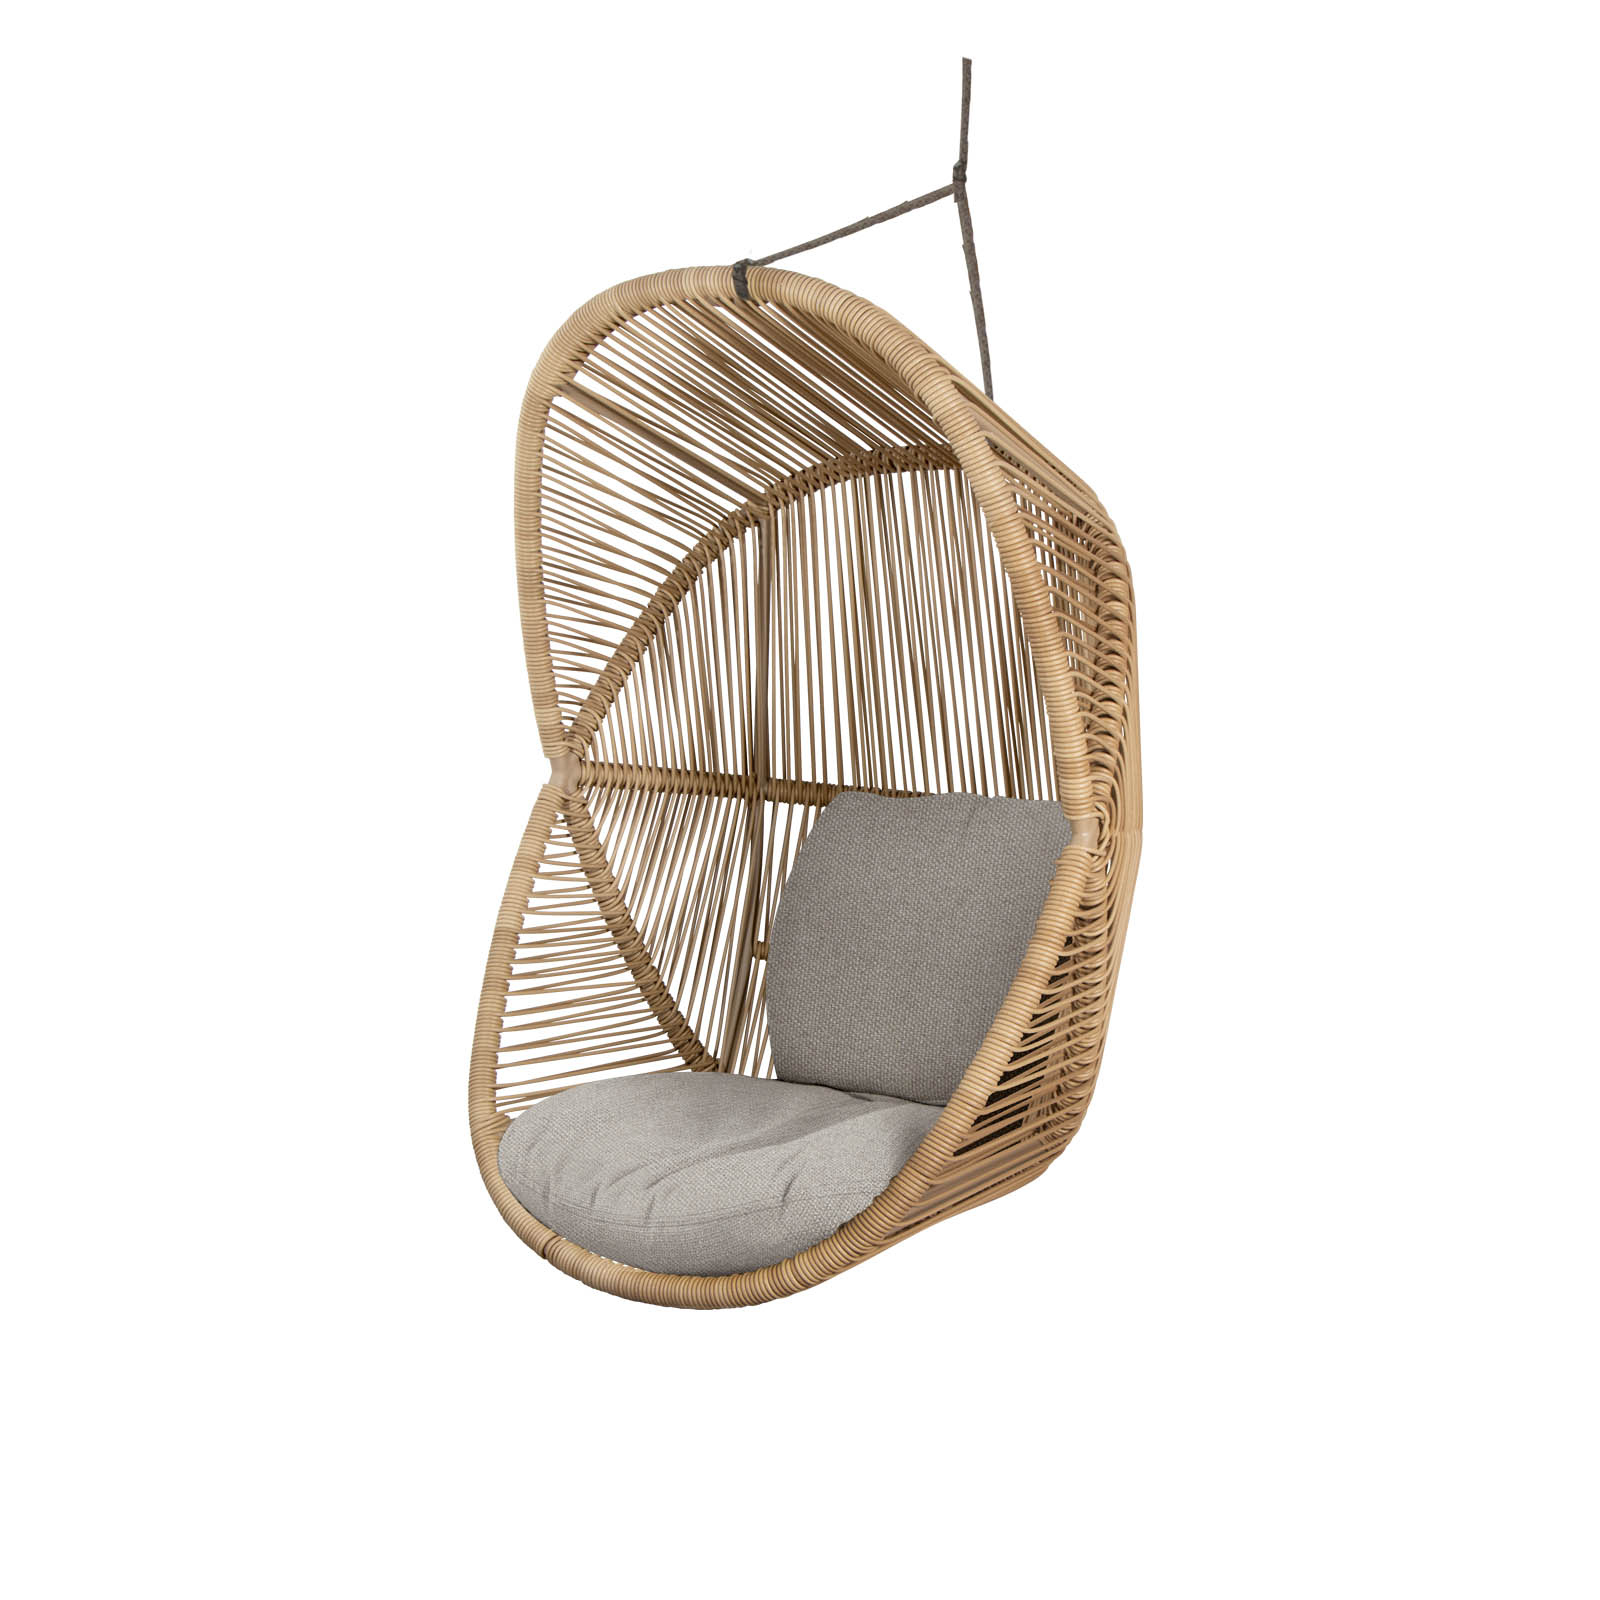 Sessel Hive aus CL Weave in Natural mit Basis aus CL Soft Rope in Taupe und Kissen aus CL Rise in Desert sand